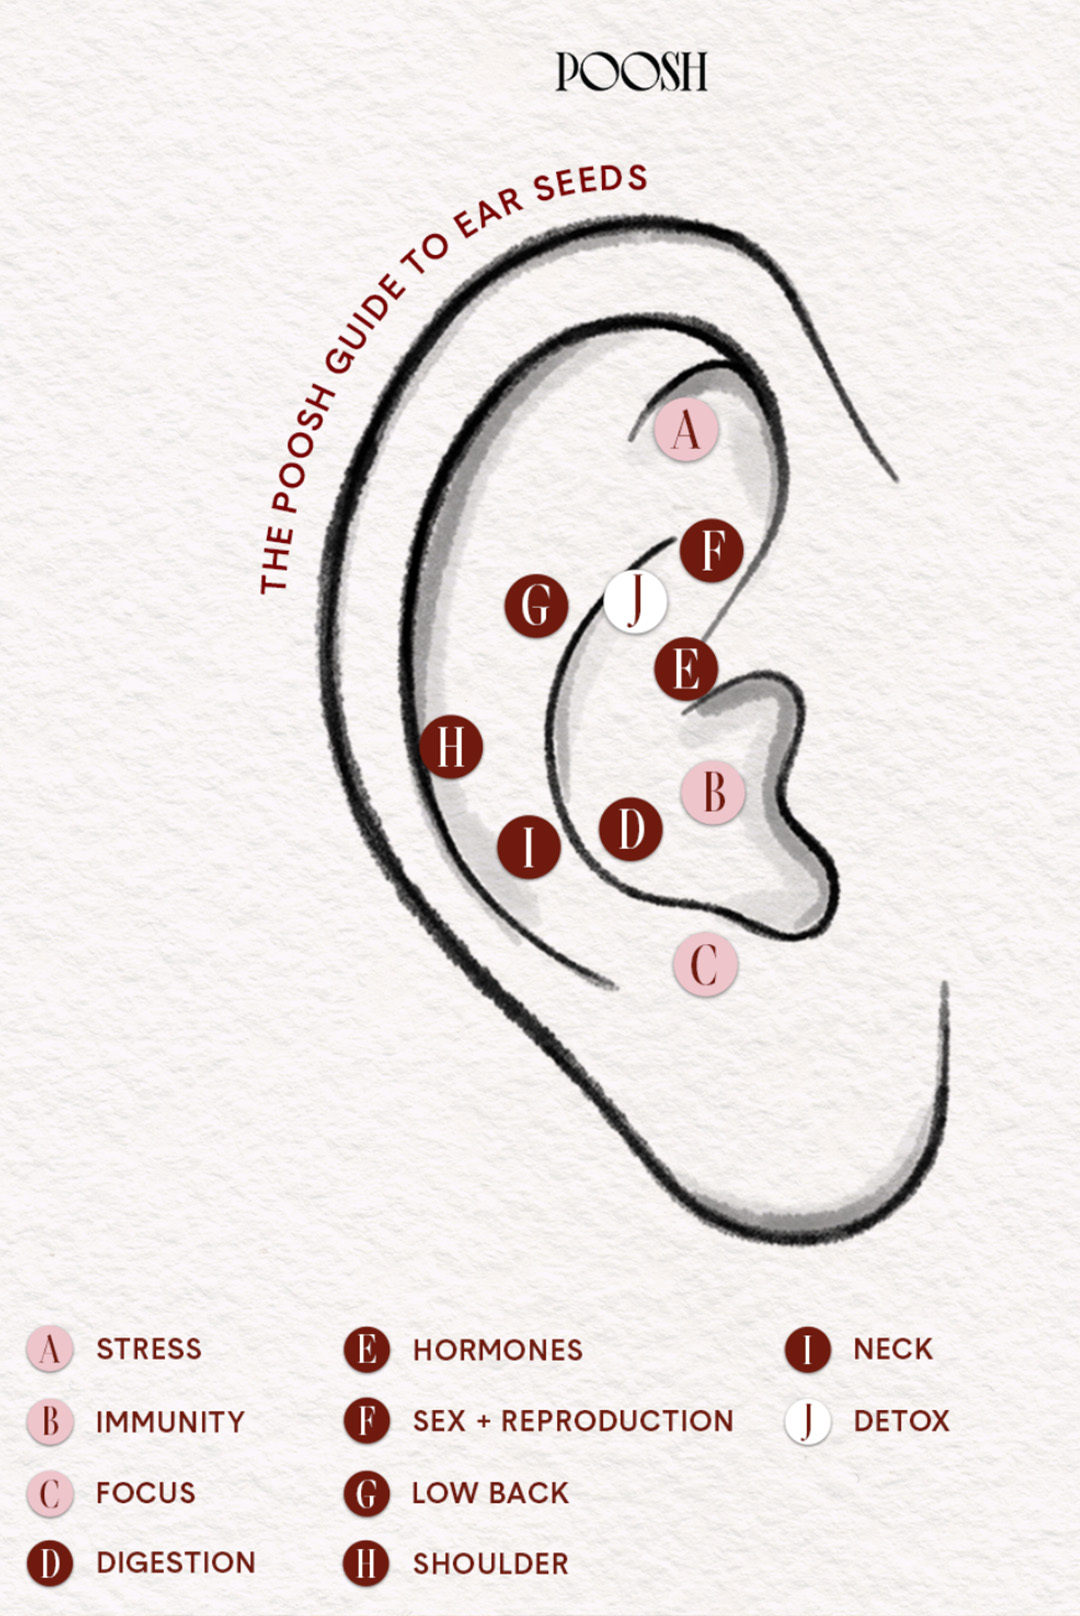 The Poosh Guide to Ear Seeds - Poosh